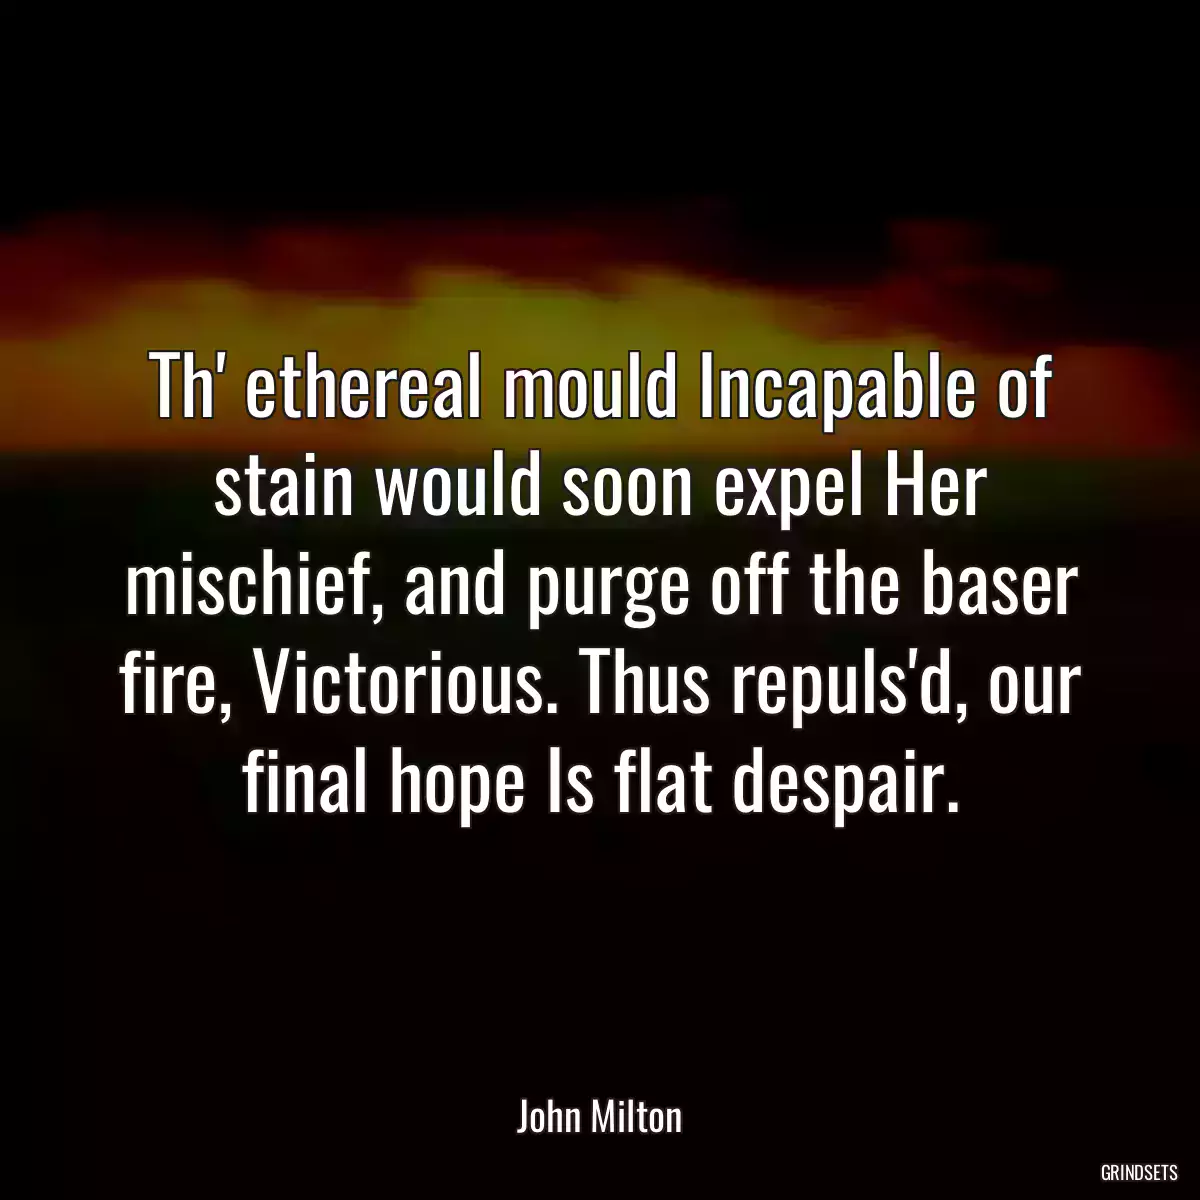 Th\' ethereal mould Incapable of stain would soon expel Her mischief, and purge off the baser fire, Victorious. Thus repuls\'d, our final hope Is flat despair.